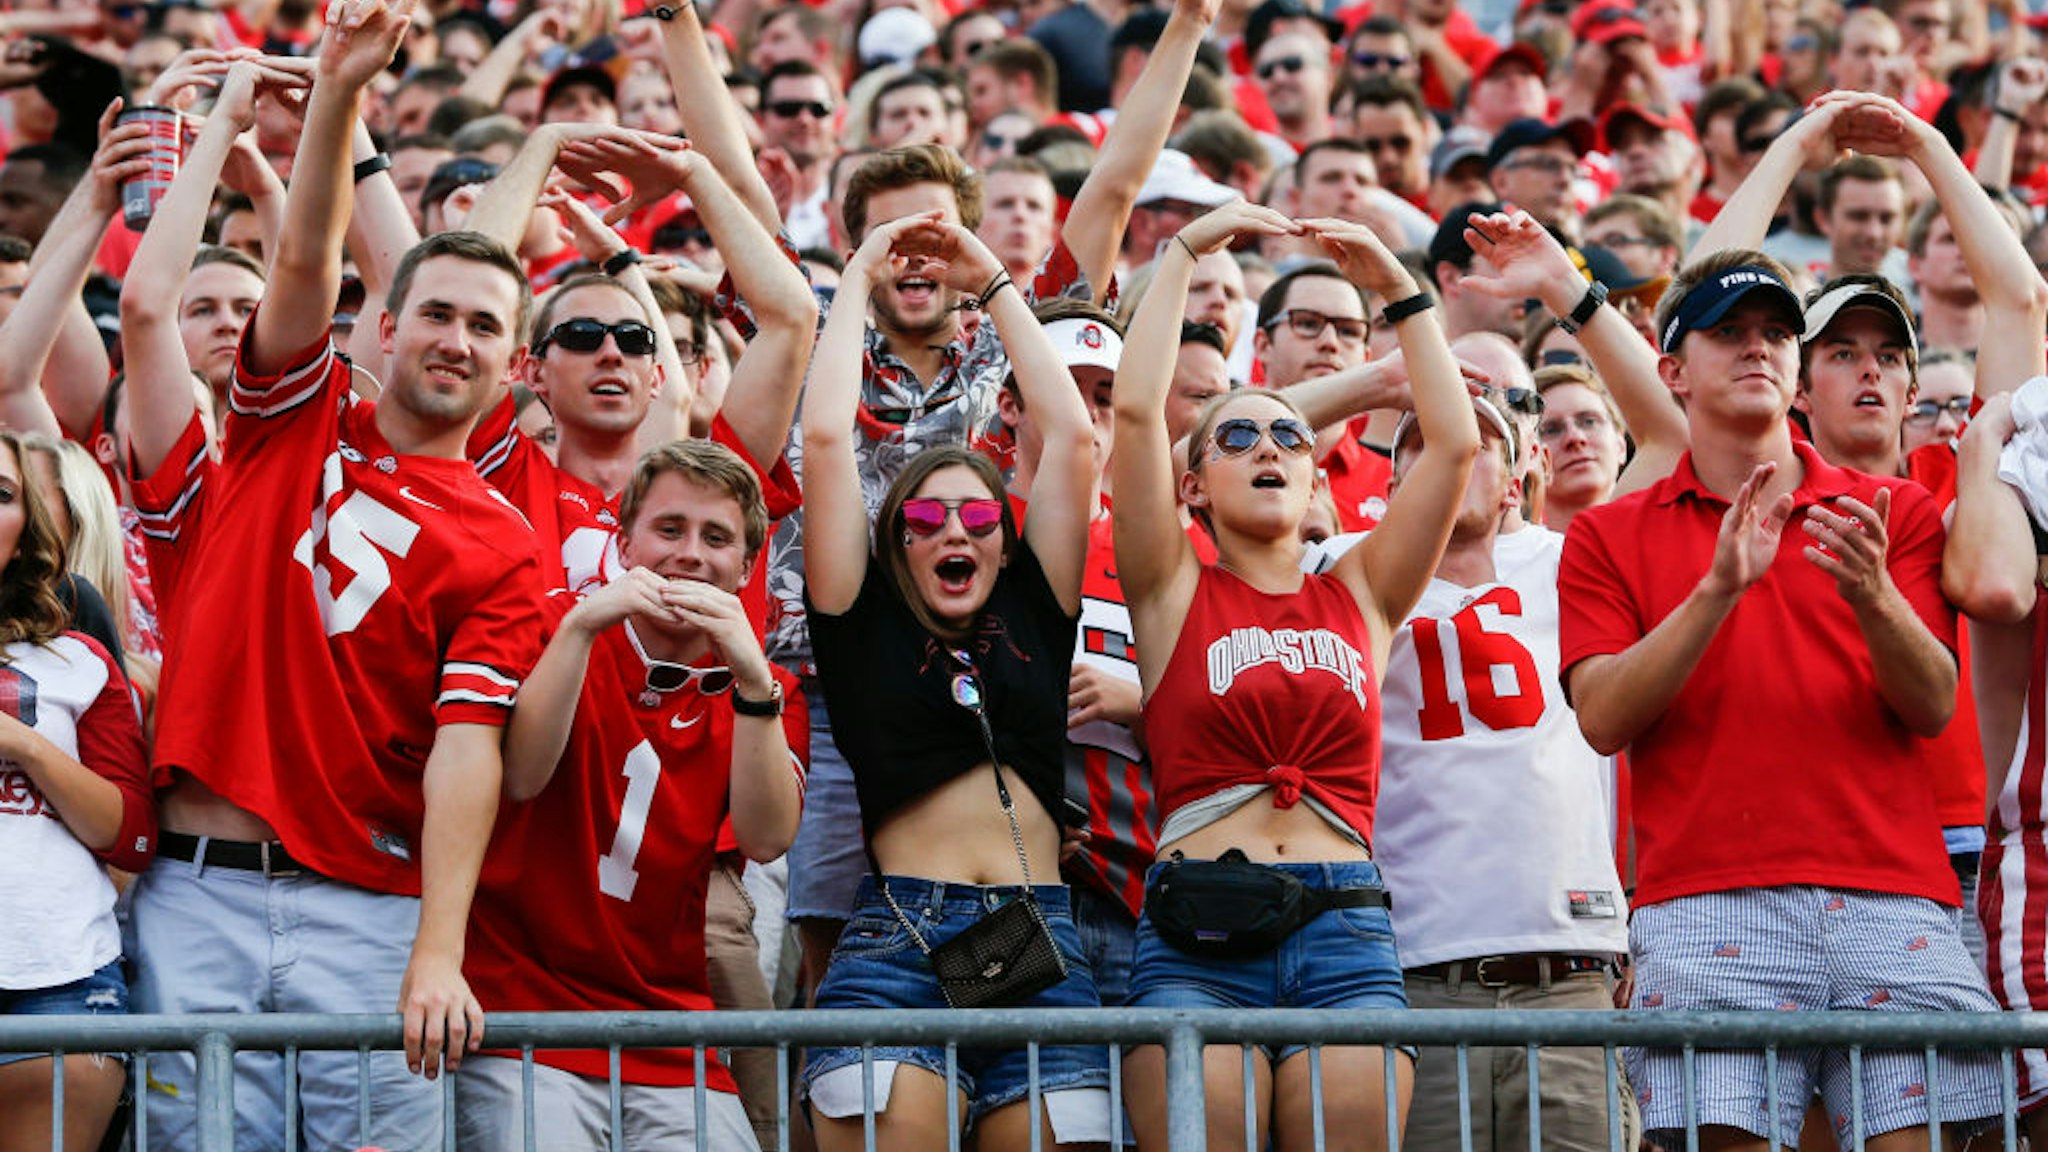 Ohio State students cheer during game action between the Army Black Knights and the Ohio State Buckeyes (8) on September 16, 2017 at Ohio Stadium in Columbus, Ohio.